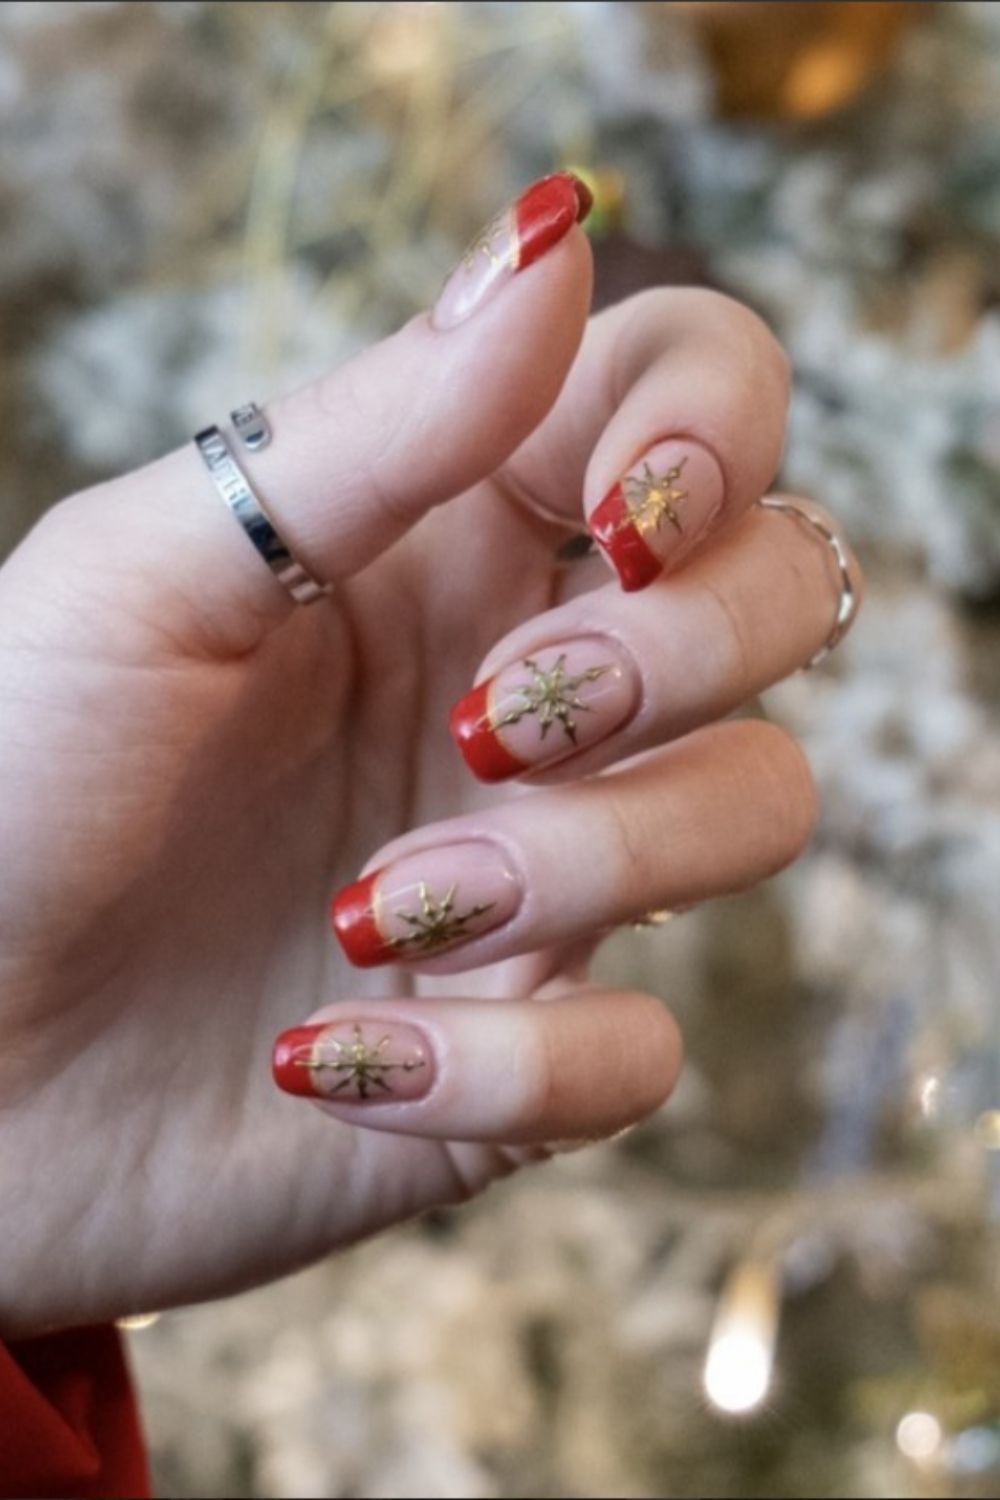 Short nails art with gold star